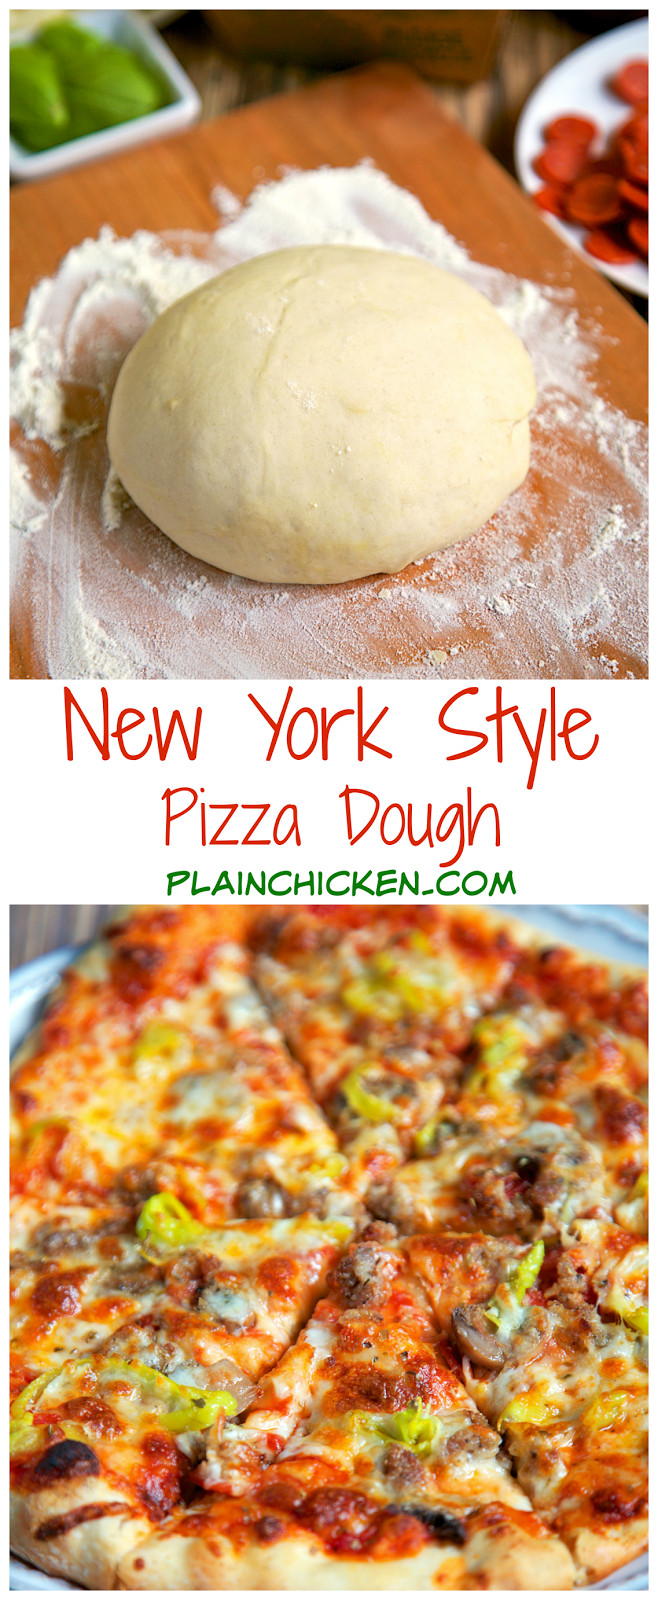 Best Premade Pizza Dough
 New York Style Pizza Dough Recipe only 4 ingre nts to